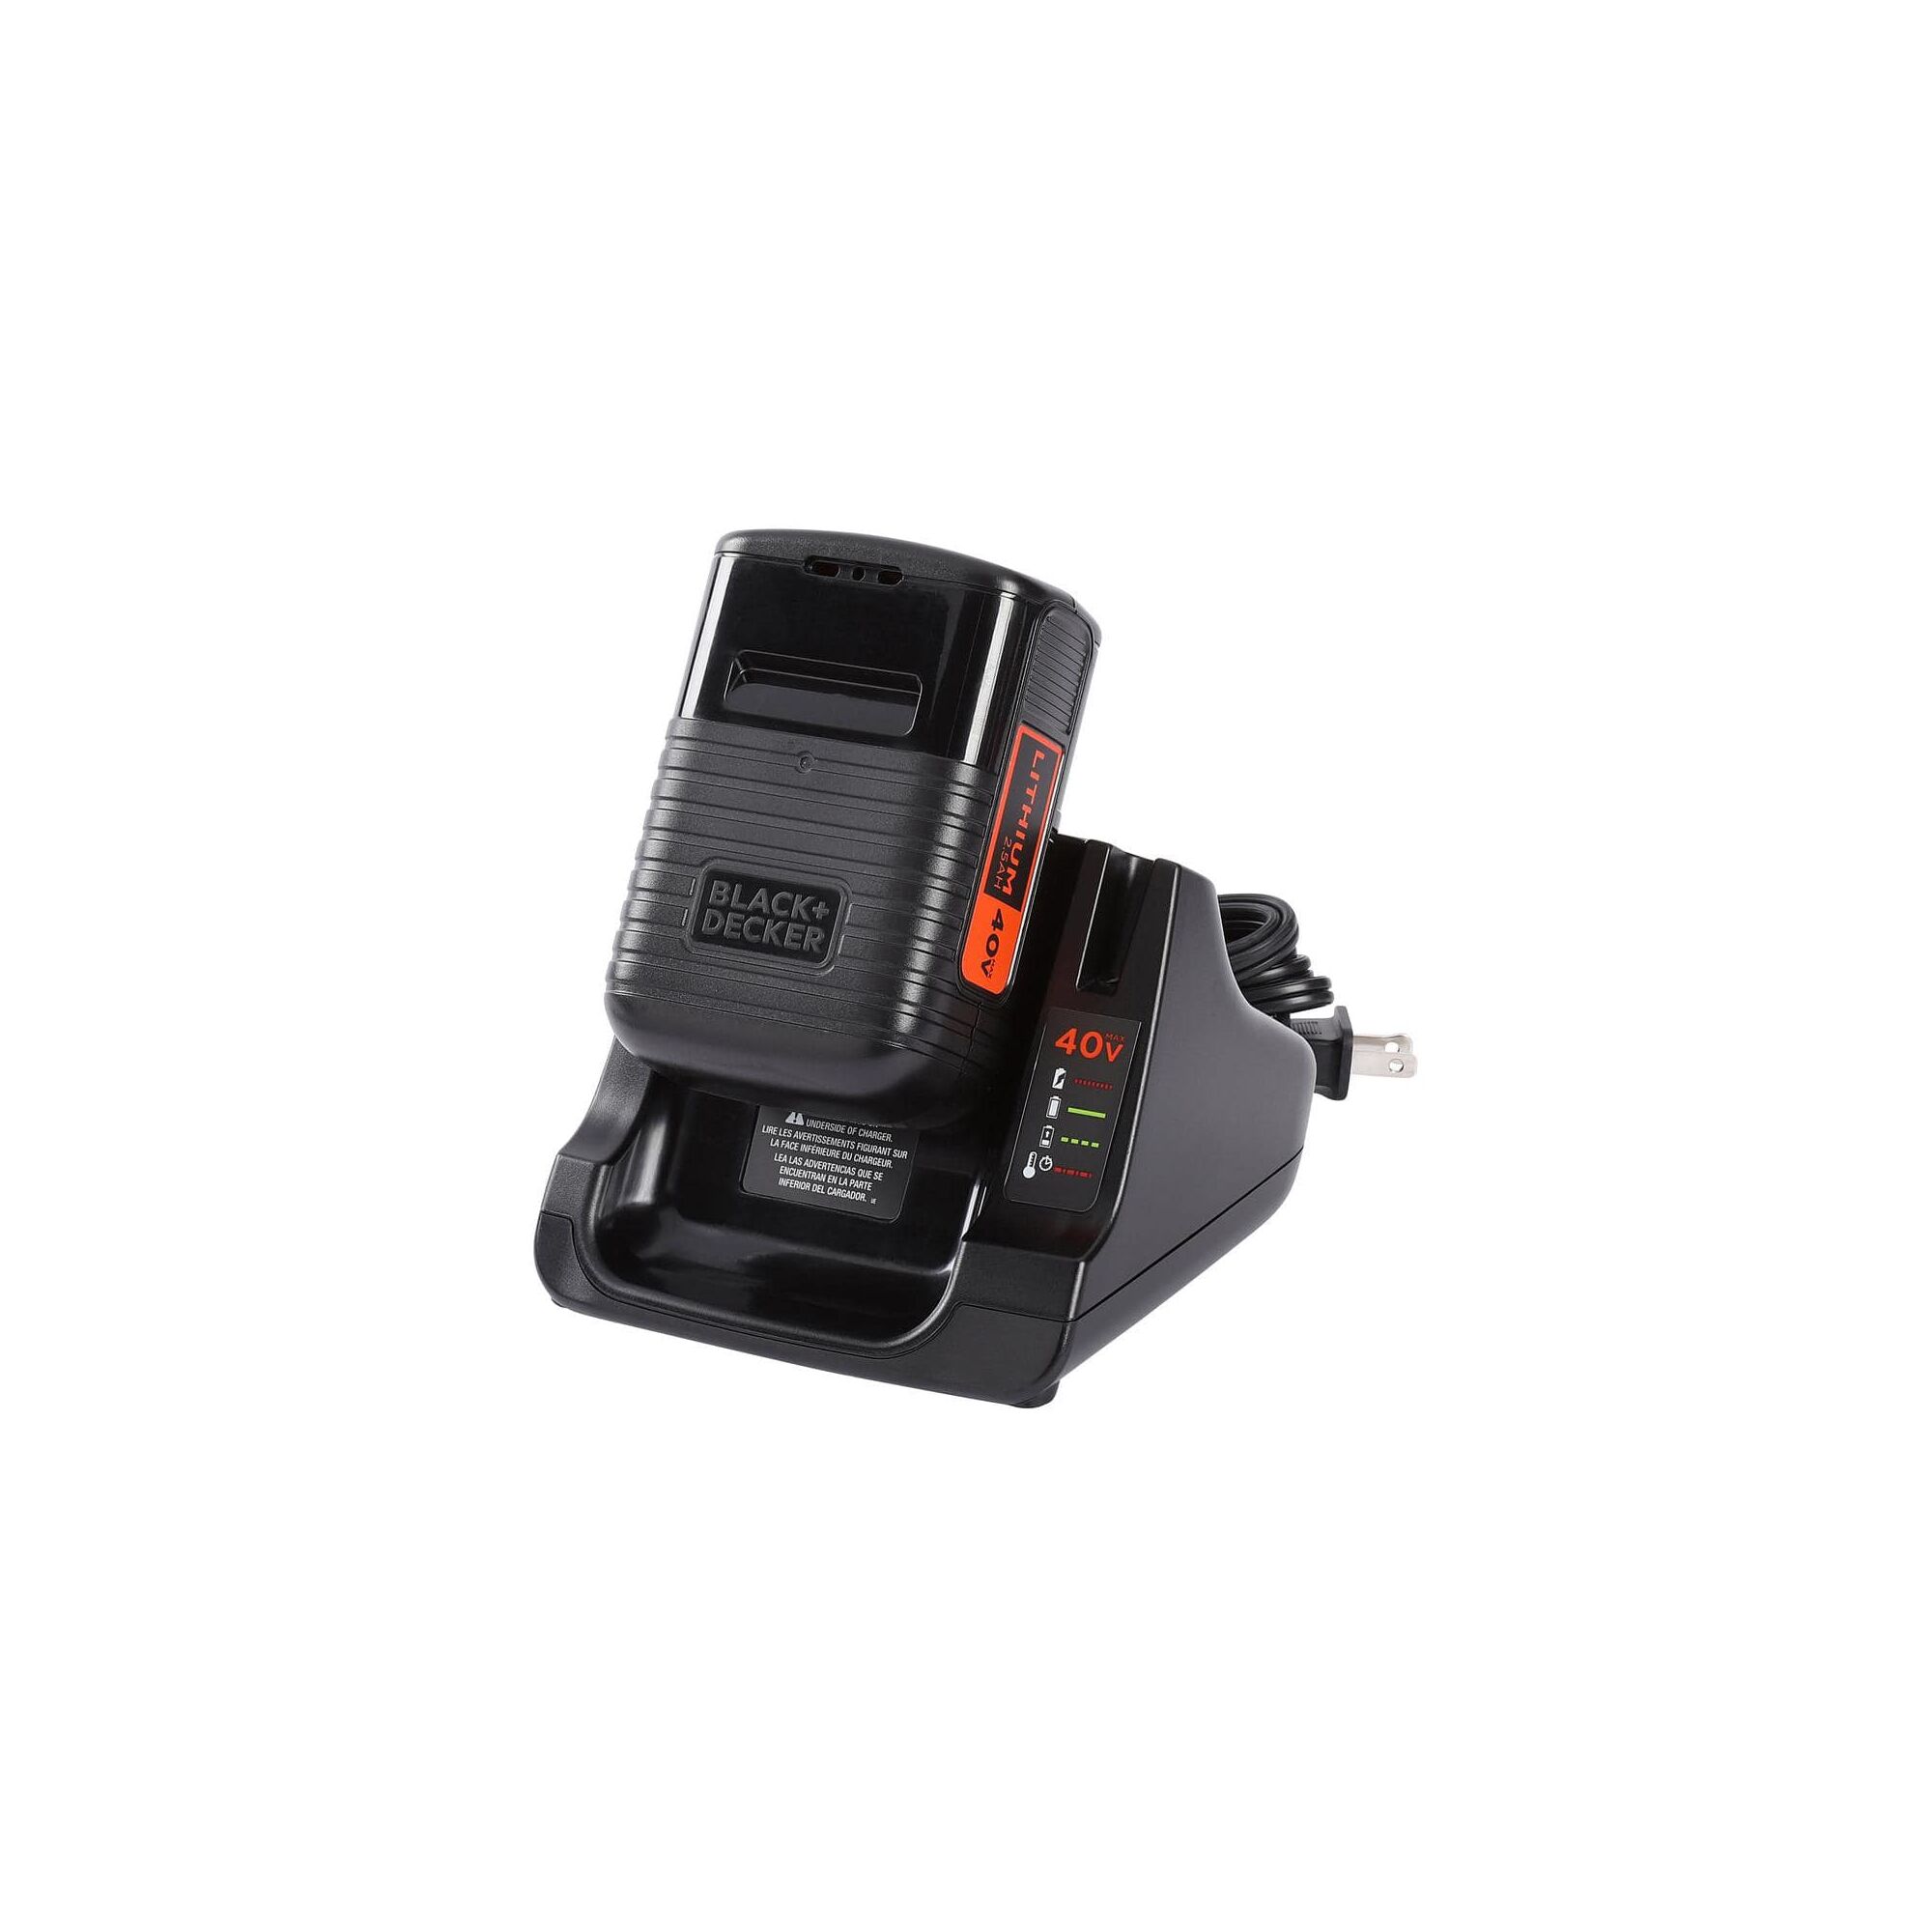 Battery and charging base compatible with BLACK+DECKER lawn mower